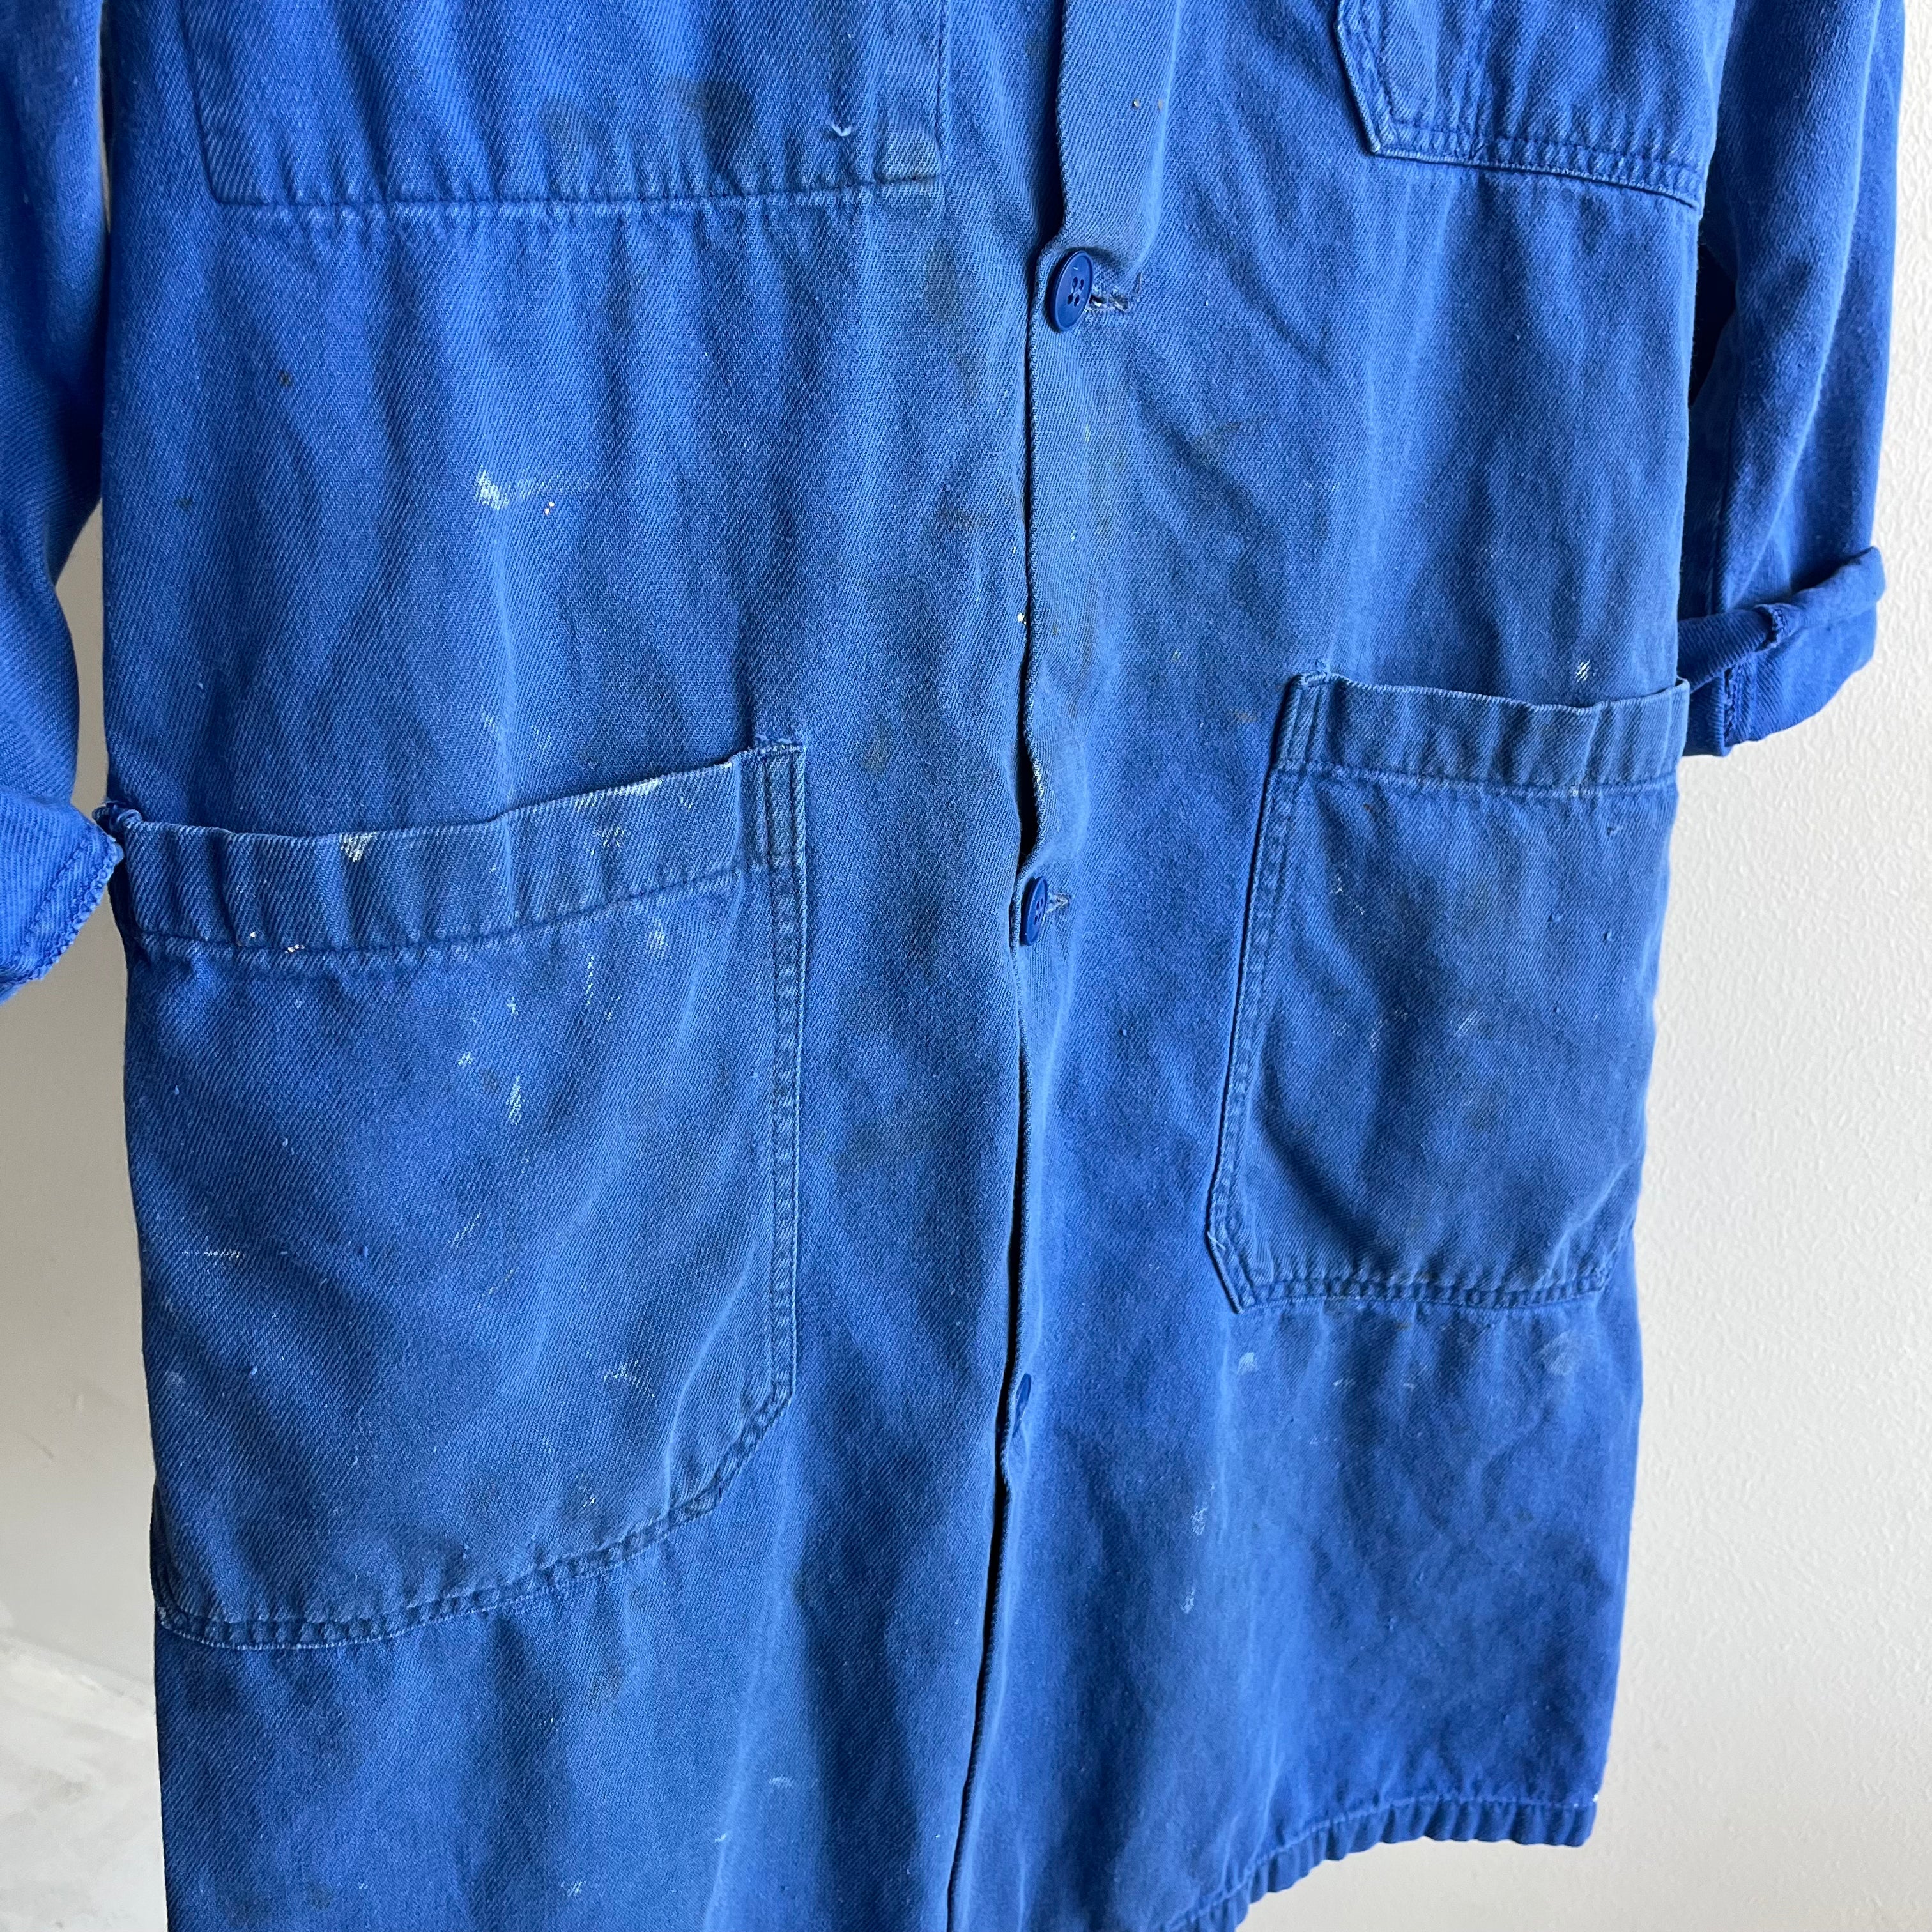 1970s Super Soft and Worn French Chore Duster - Fitted